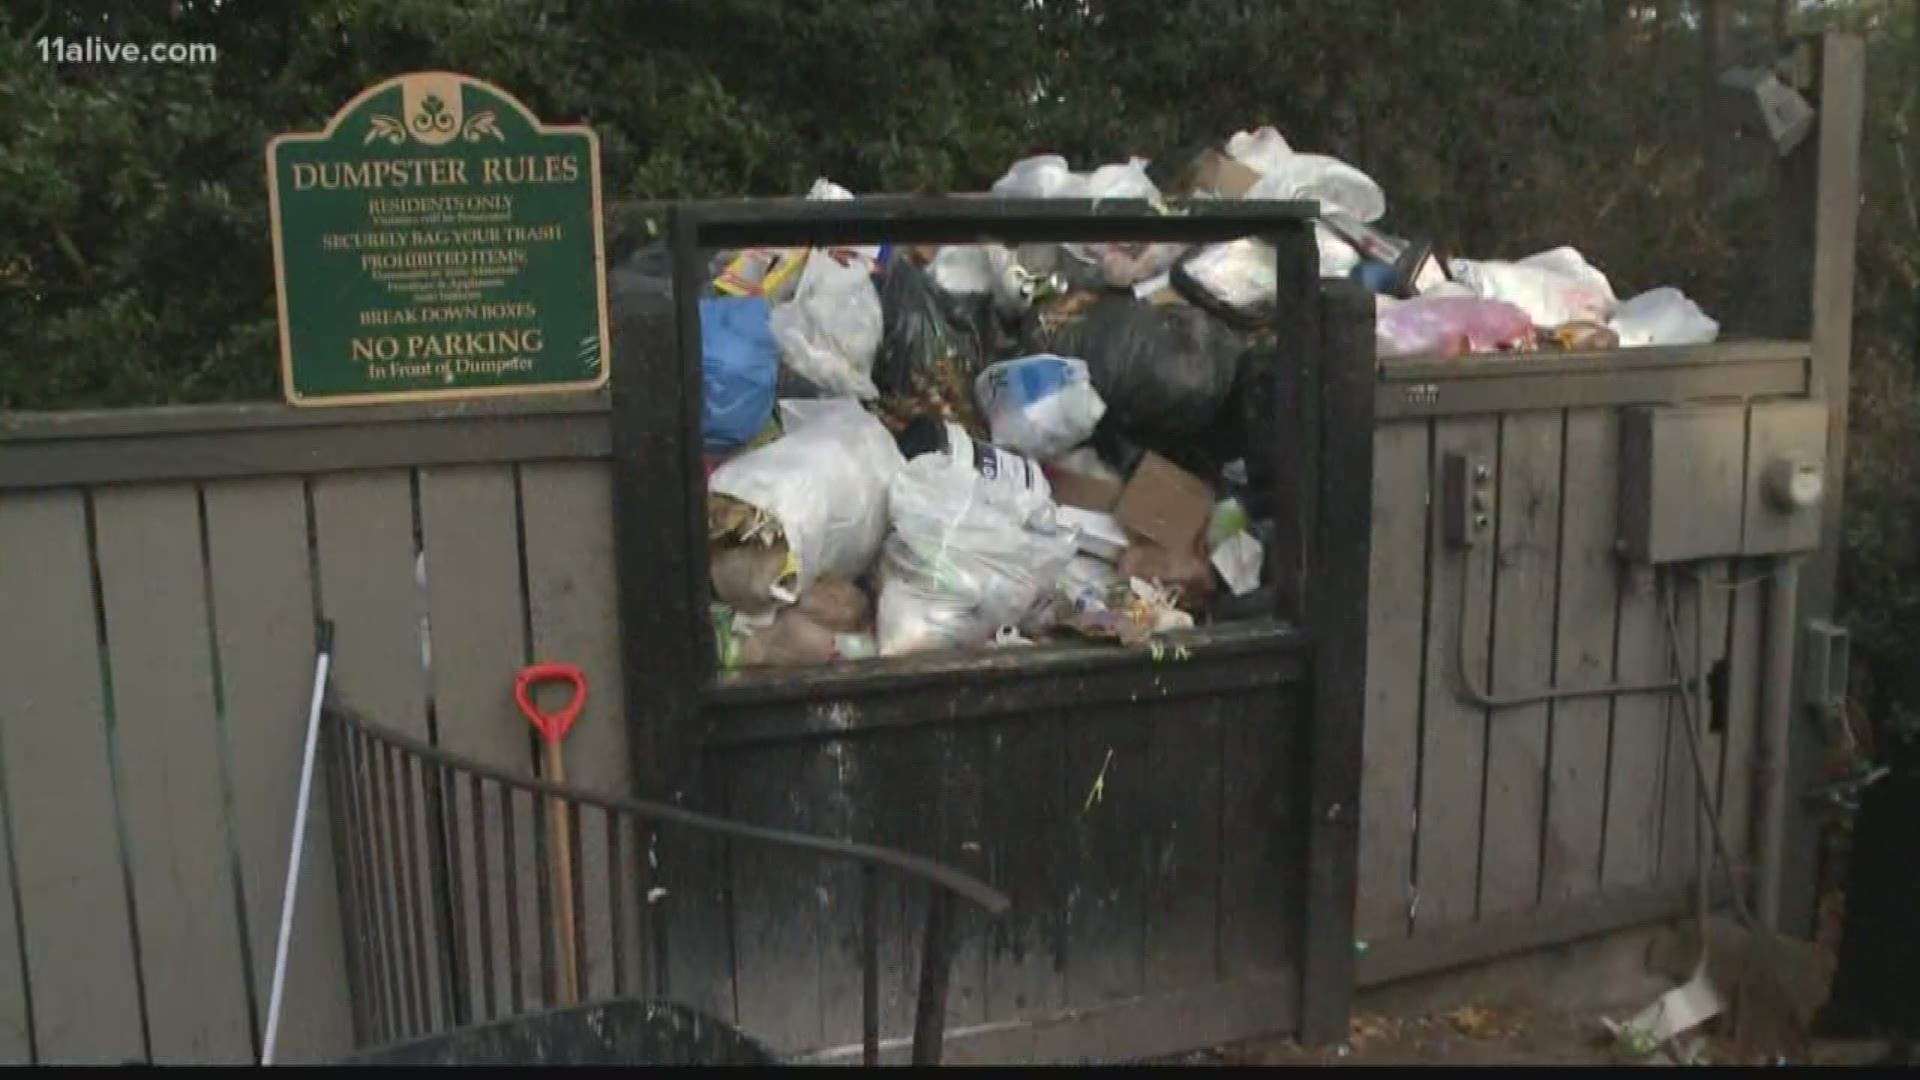 Residents of an apartment complex in a Gwinnett County city are hoping for a speedy resolution to what's become a smelly - and unsanitary - situation.